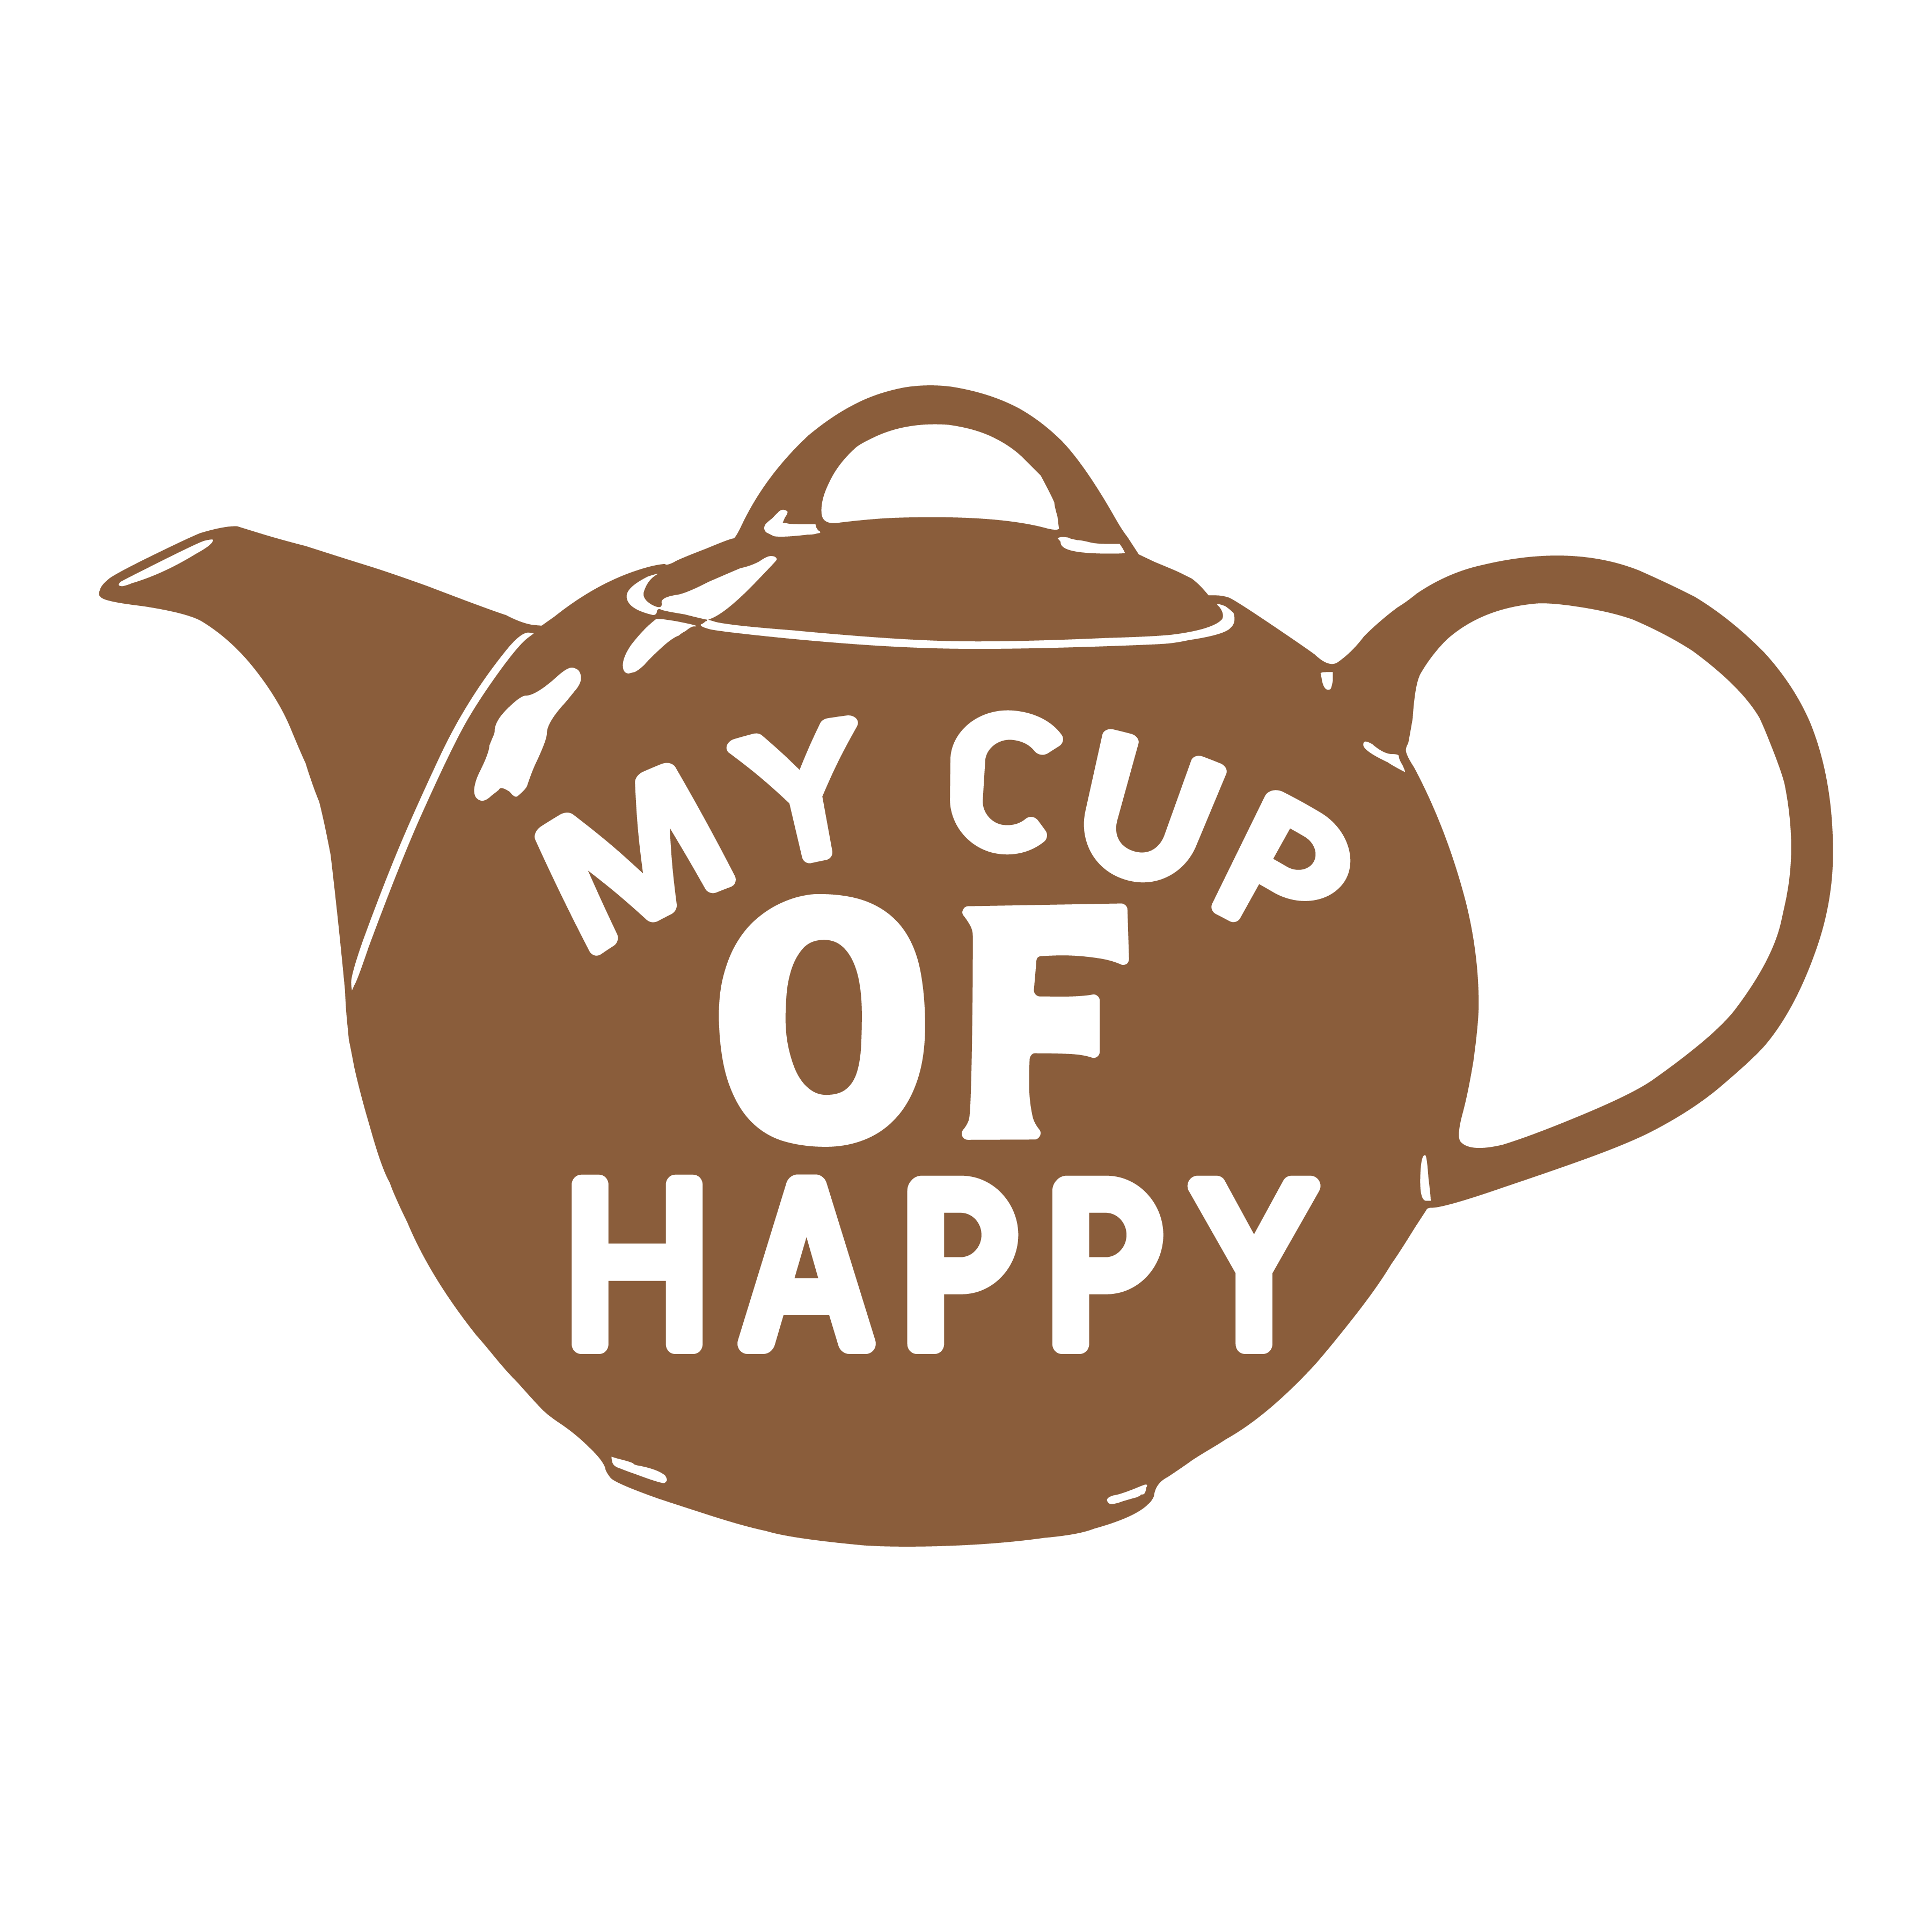 my cup of happy, tea sayings, tea quotes, Cricut designs, free, clip art, svg file, template, pattern, stencil, silhouette, cut file, design space, short, funny, shirt, cup, DIY crafts and projects, embroidery